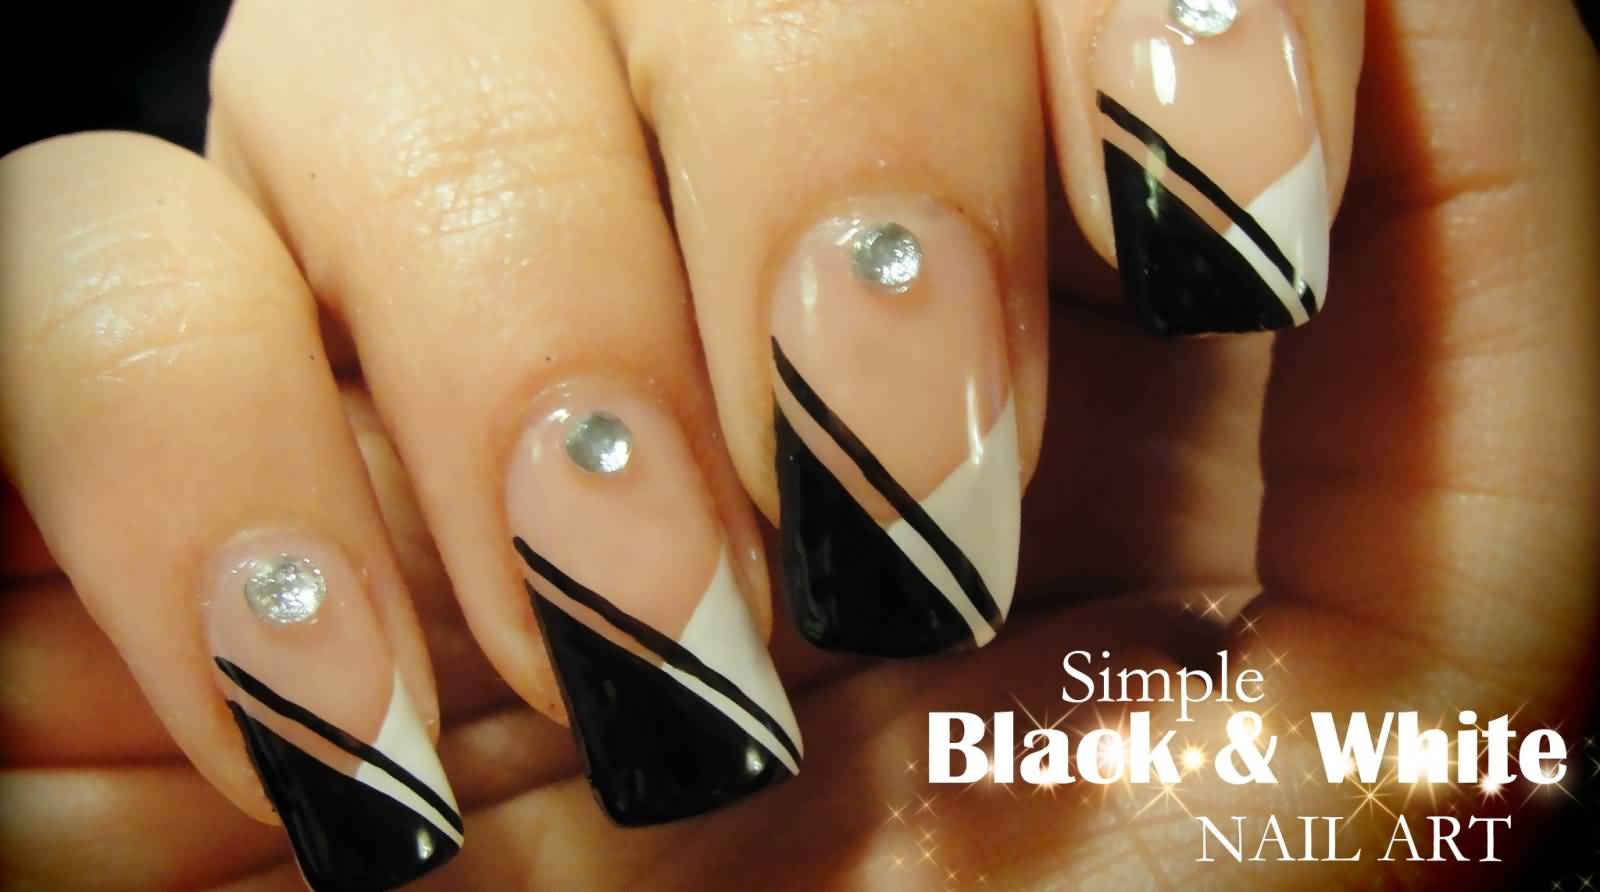 Simple Black And White Tip Design Nail Art With Rhinestones